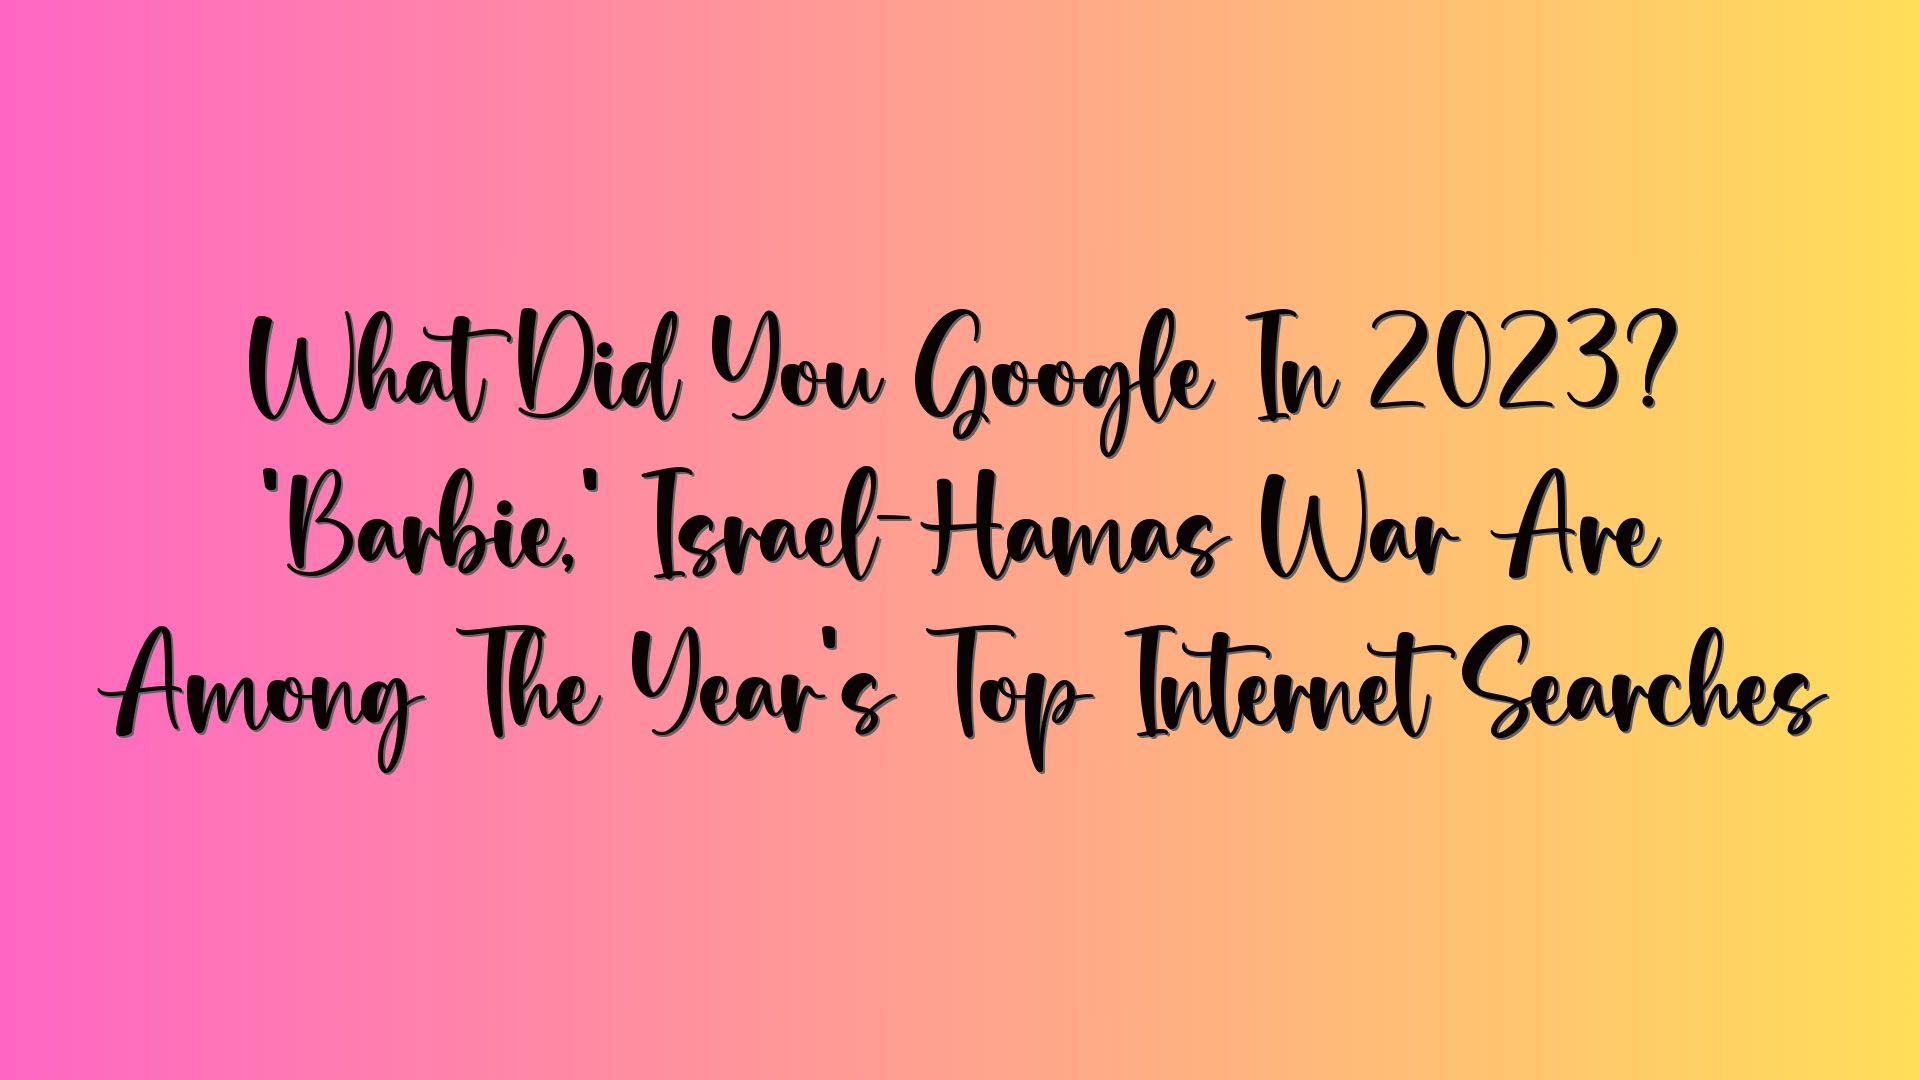 What Did You Google In 2023? ‘Barbie,’ Israel-Hamas War Are Among The Year’s Top Internet Searches